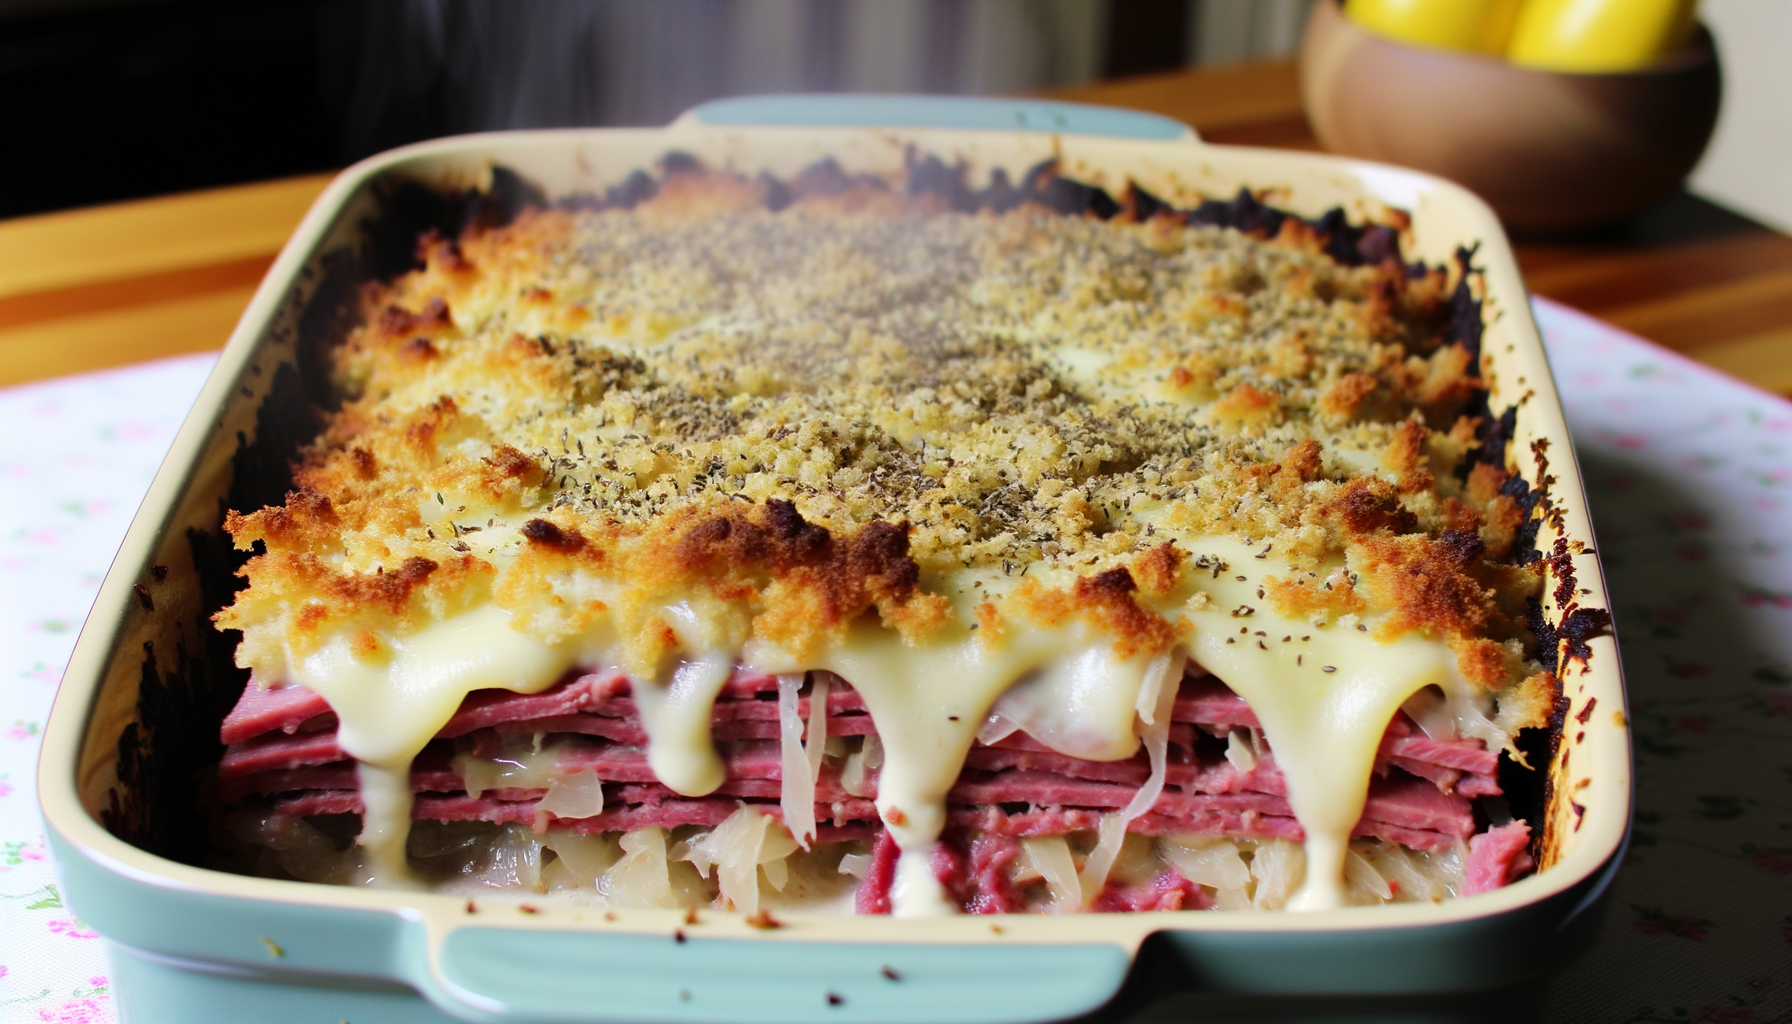 Steamy Reuben casserole with crispy rye top, layers of corned beef, sauerkraut, melted Swiss cheese, and creamy Russian dressing.